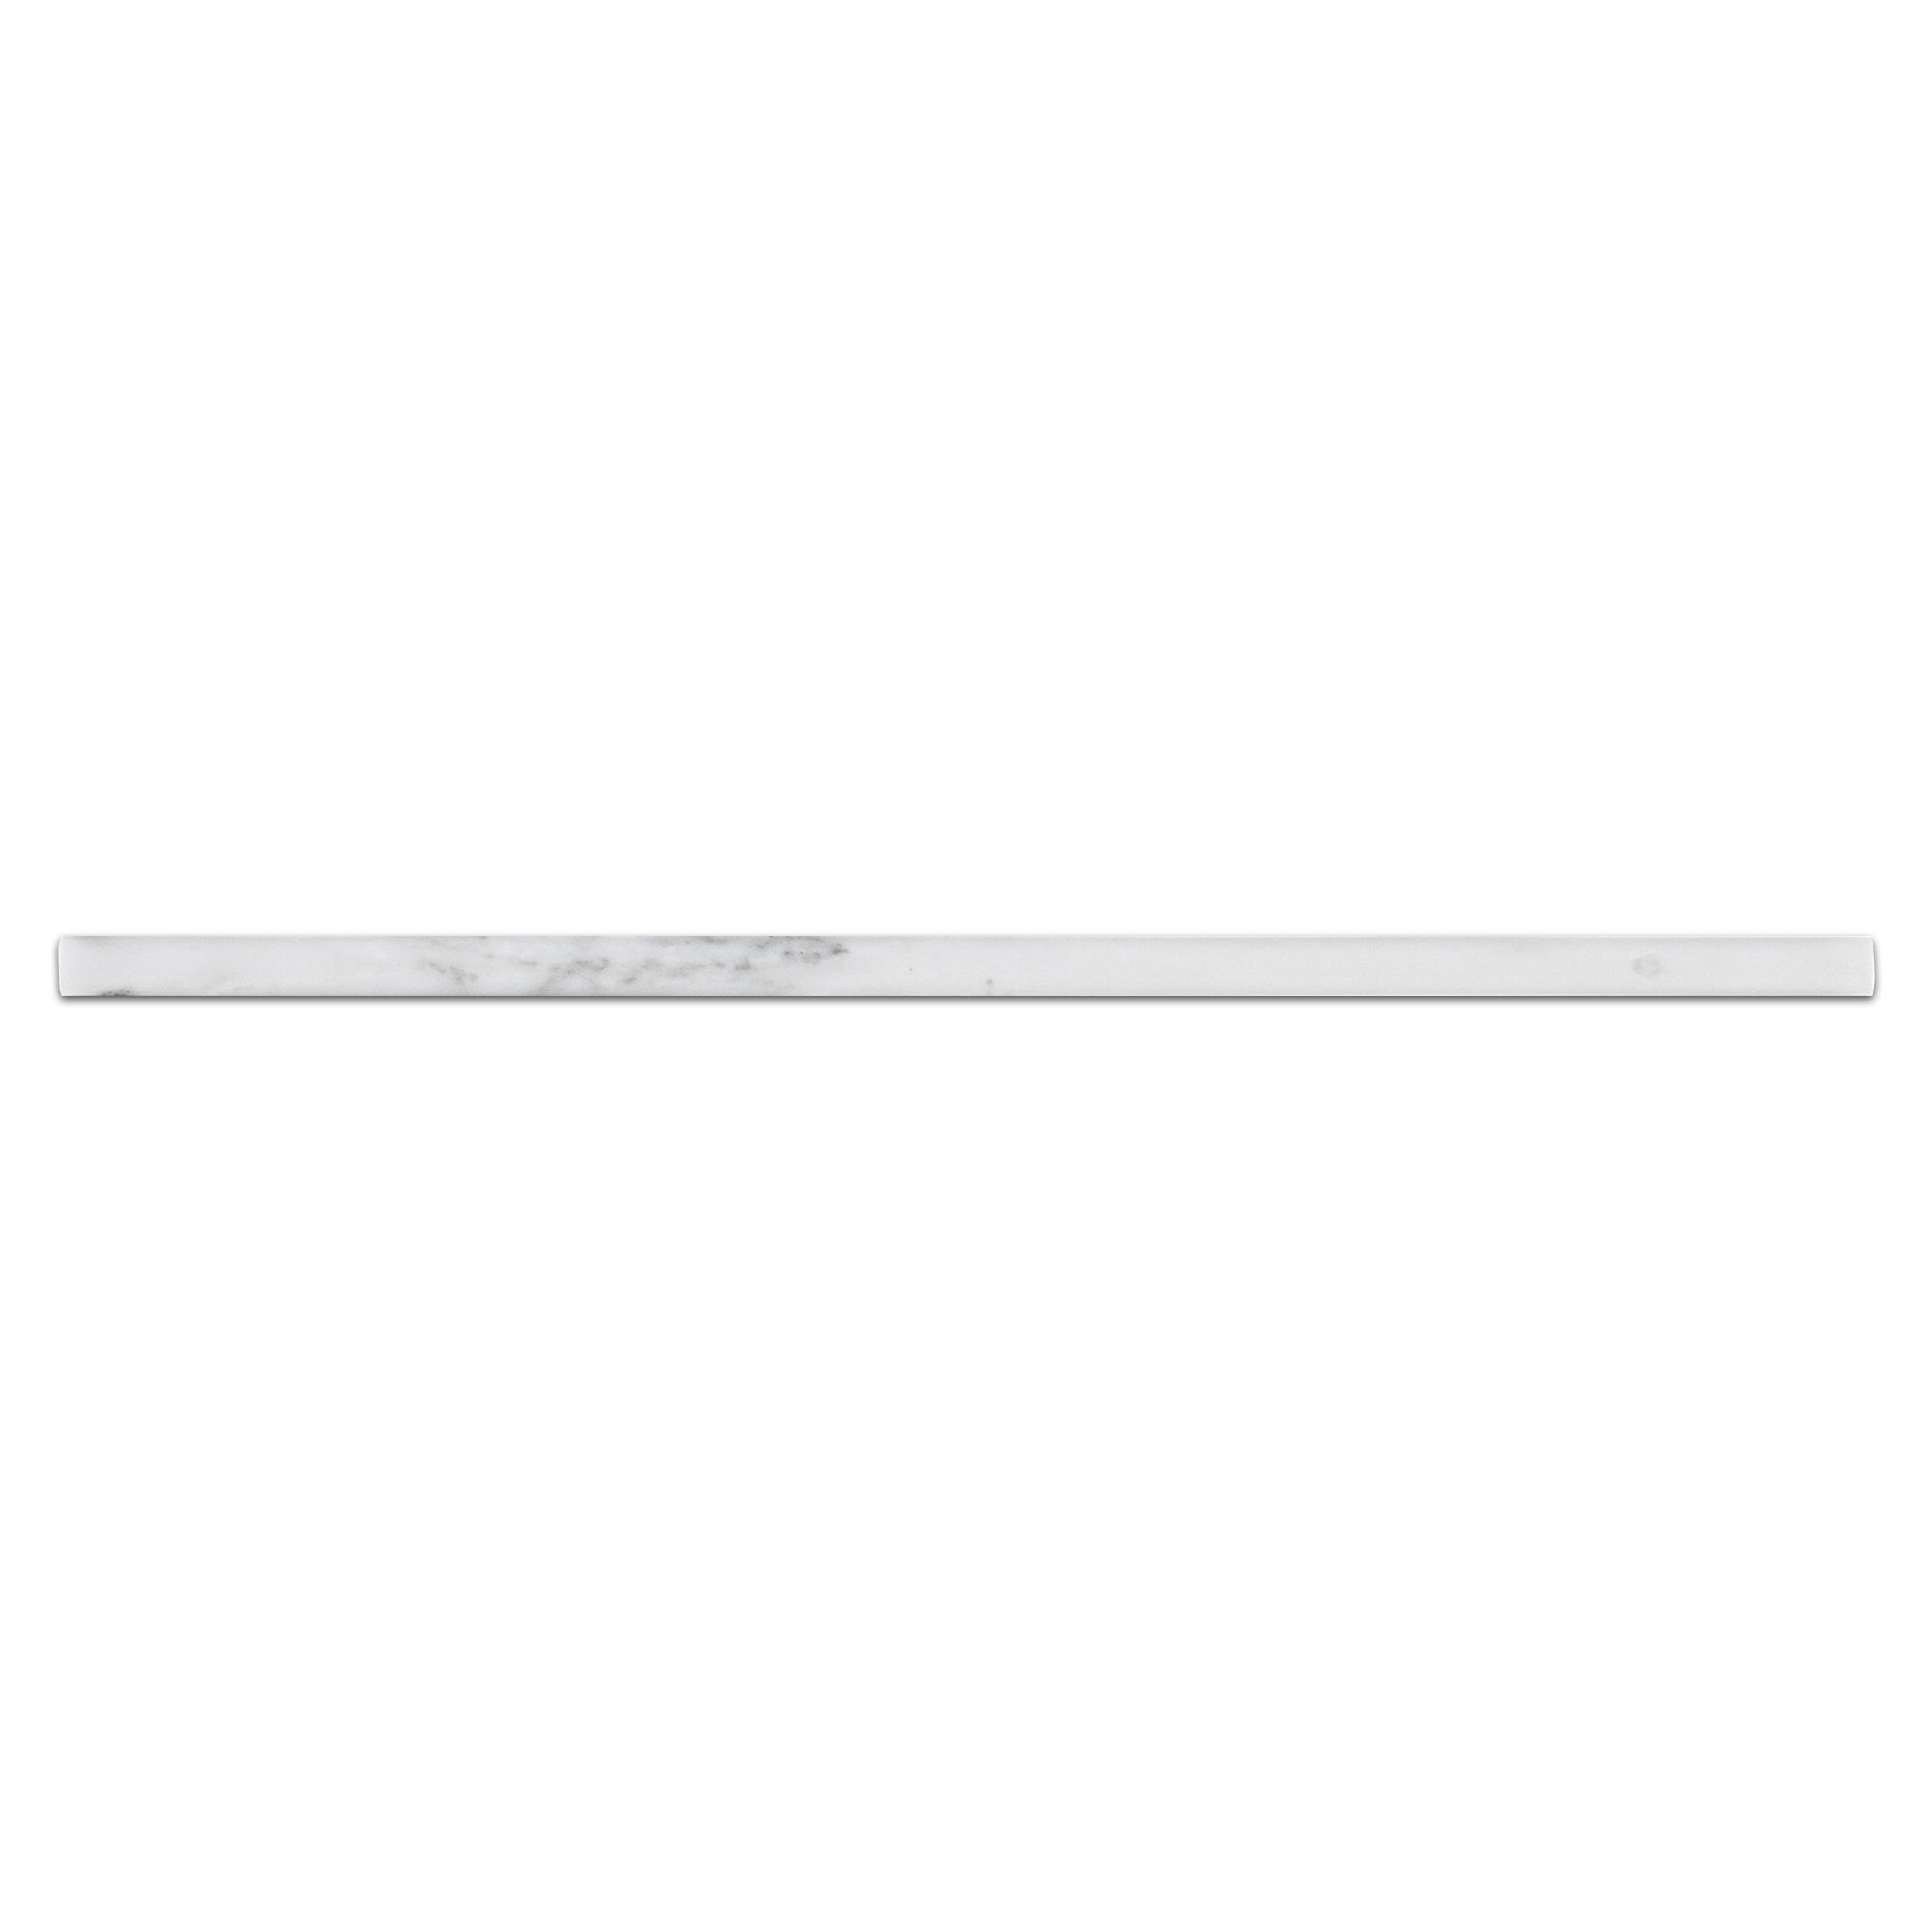 Elon Pearl White Marble Micro Pencil Tile 0.375x12x0.625 Honed - Surface Group International Product